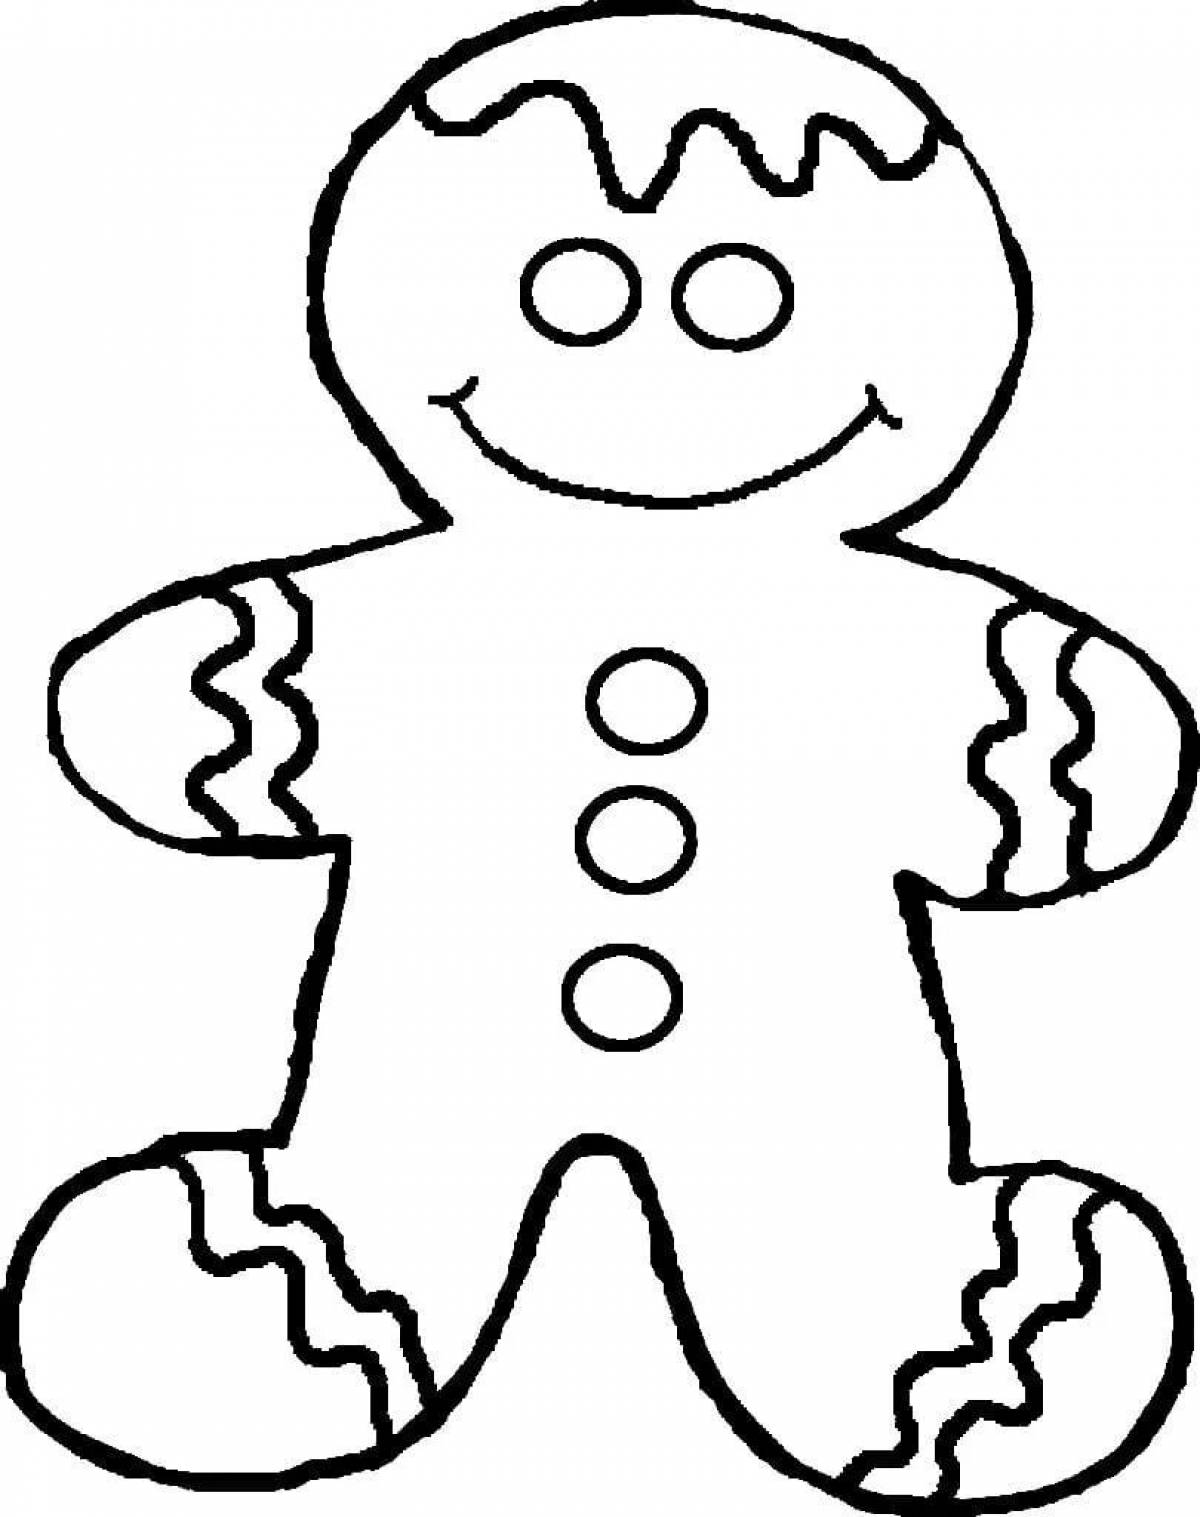 Coloring page of the exciting gingerbread man